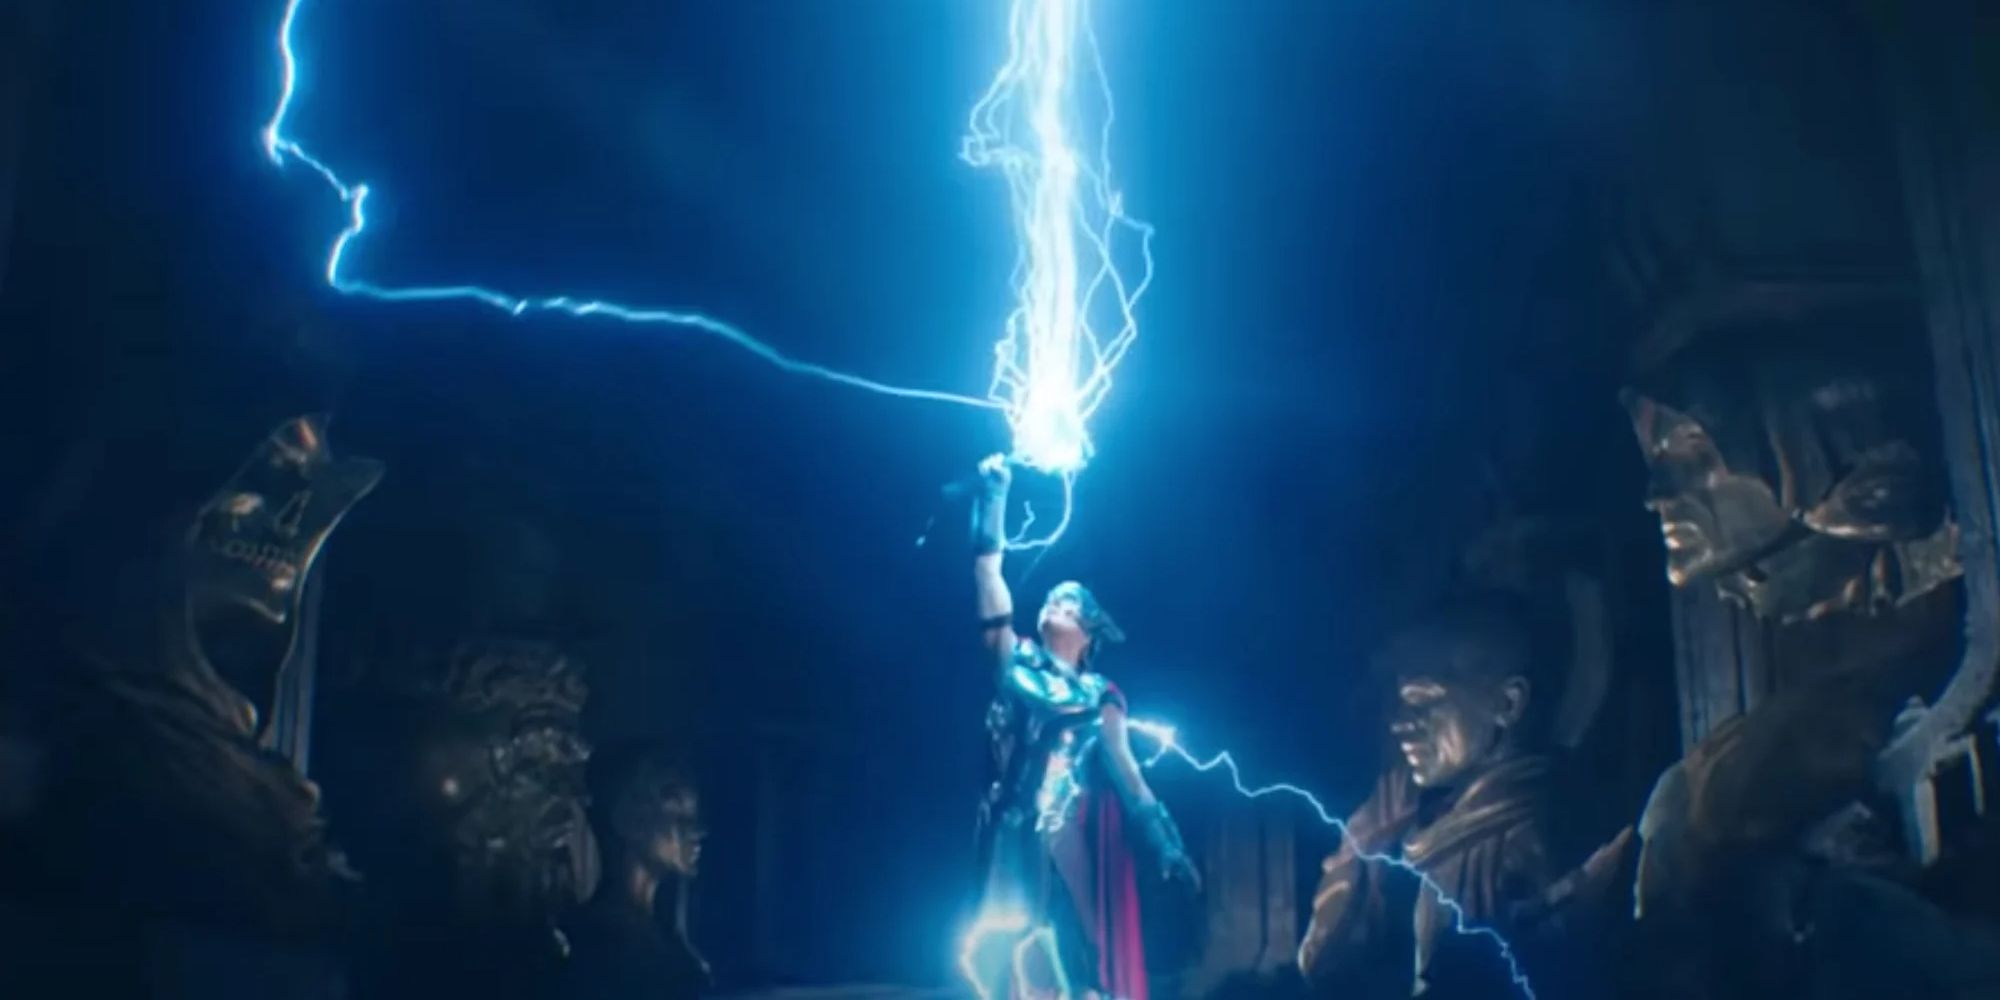 Jane summoning the power of Thor in the Gateway to Eternity in Love and Thunder